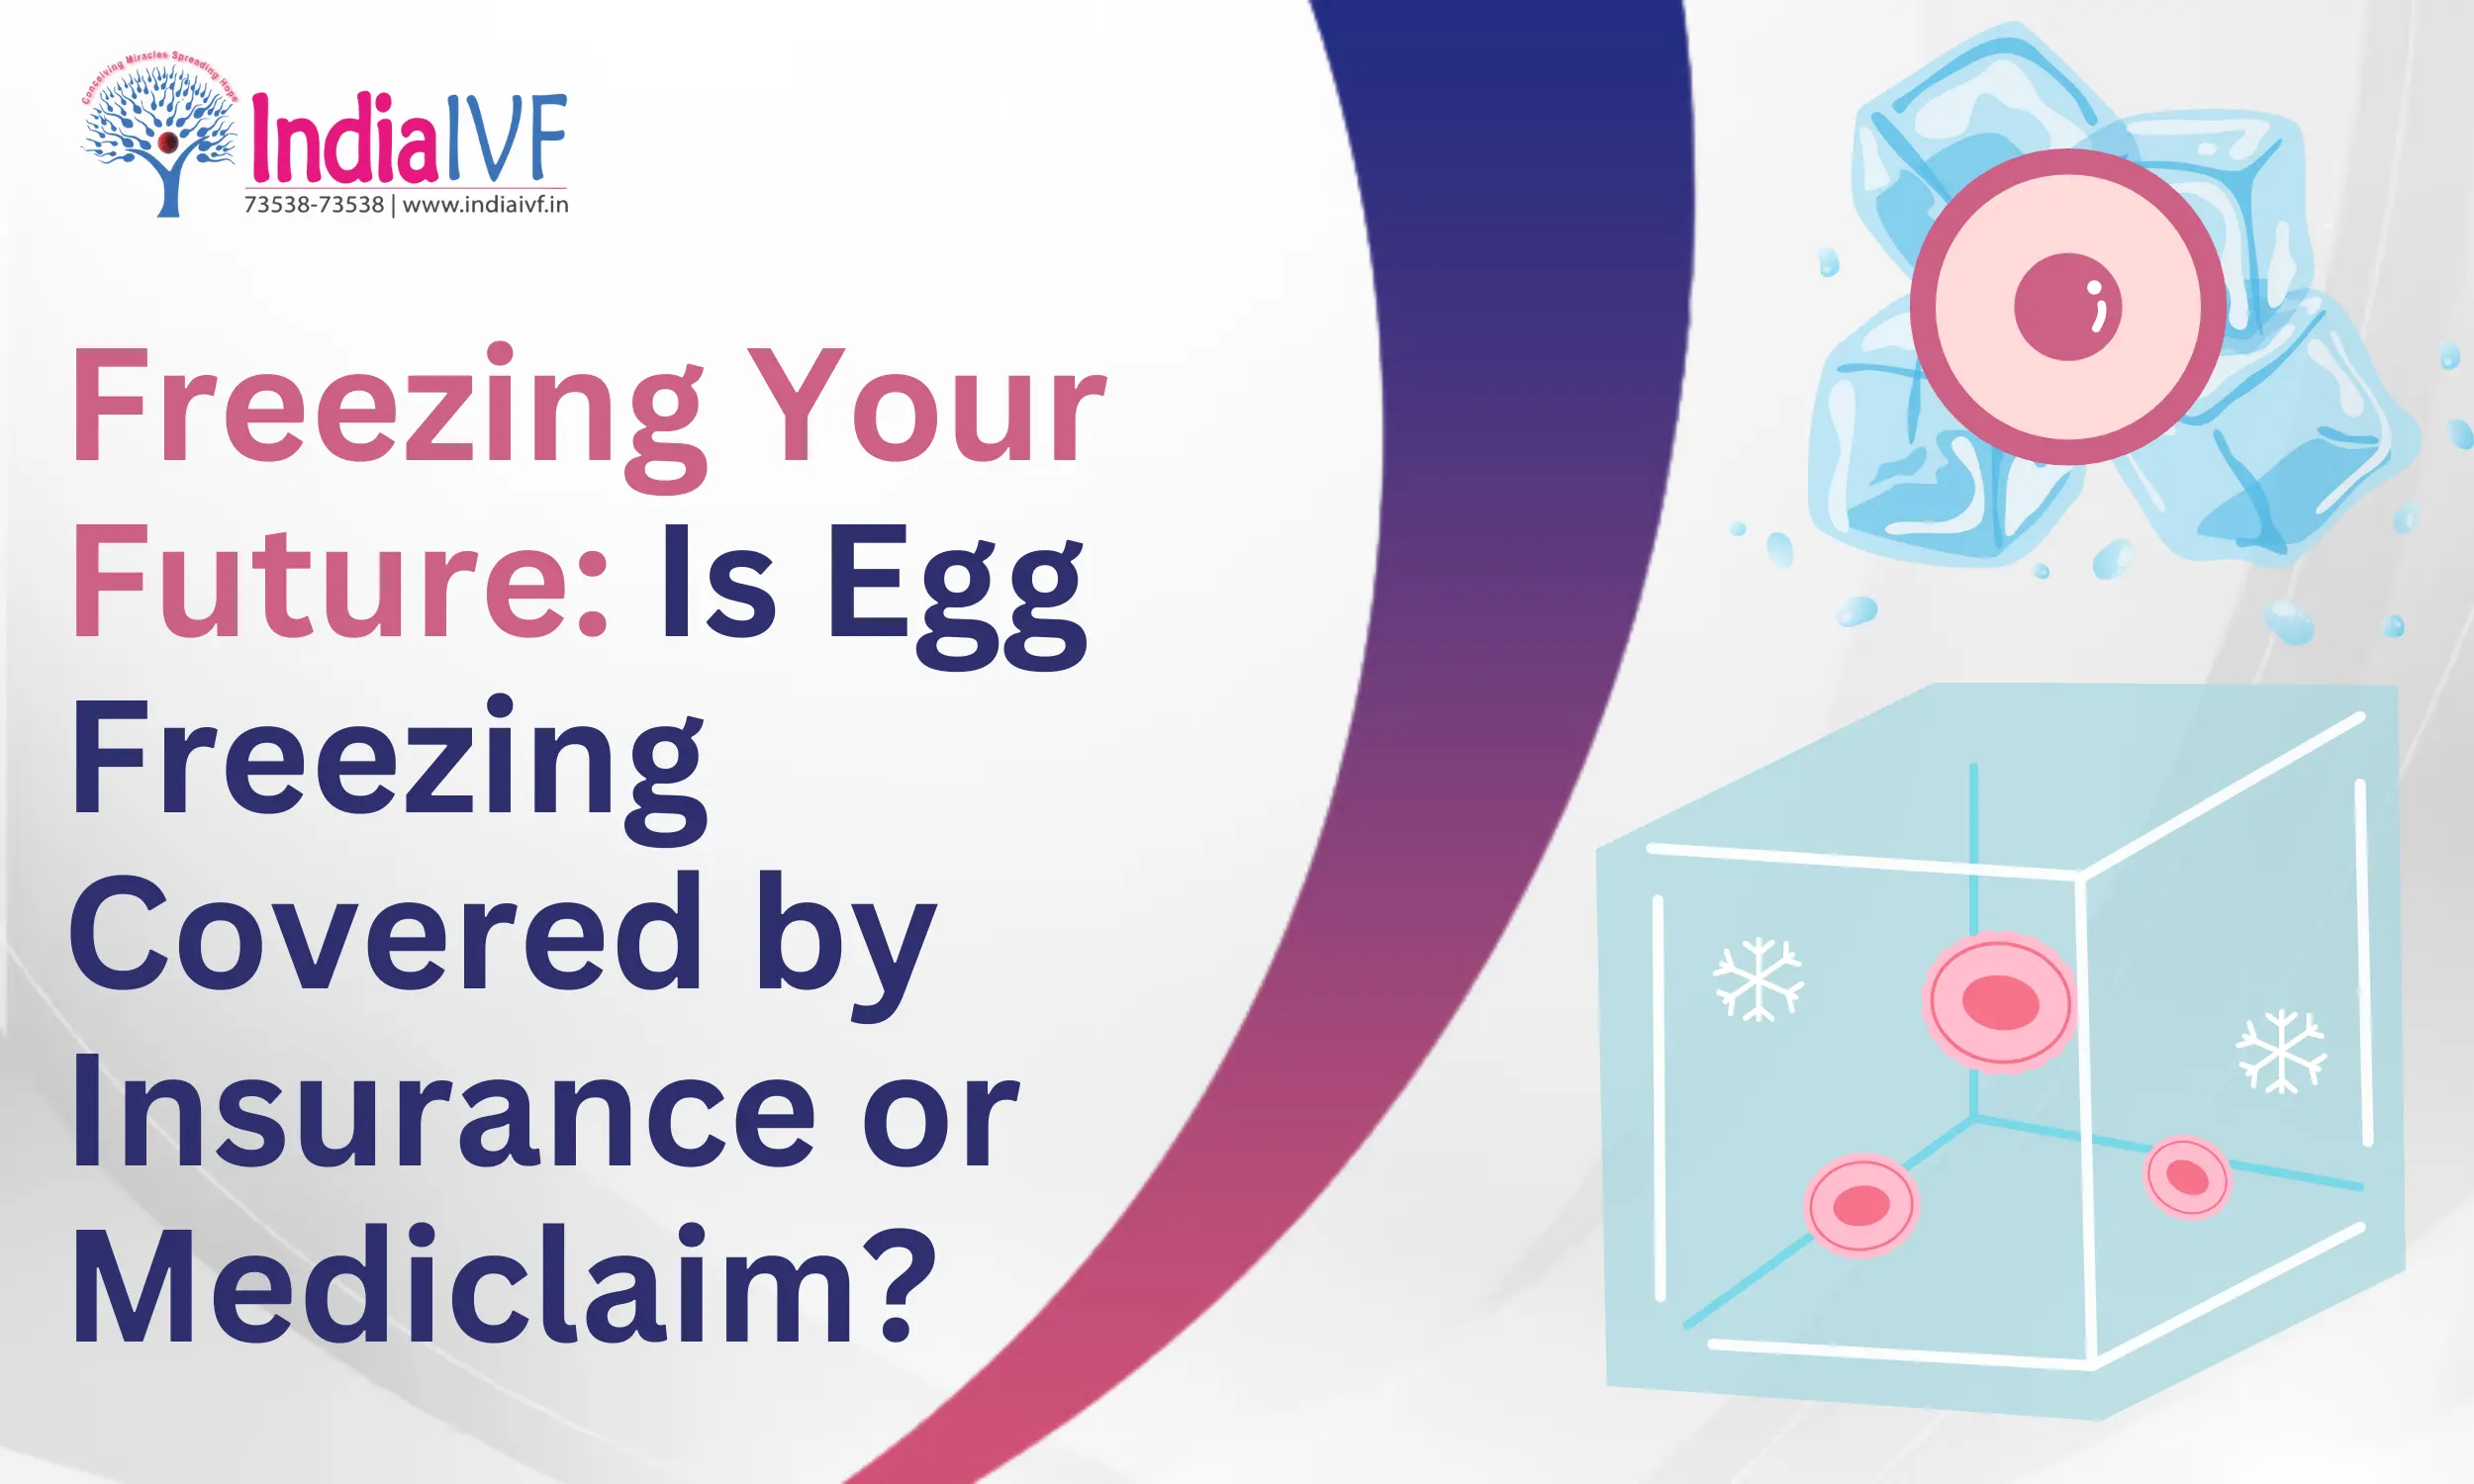 Freezing Your Future: Is Egg Freezing Covered by Insurance or Mediclaim?